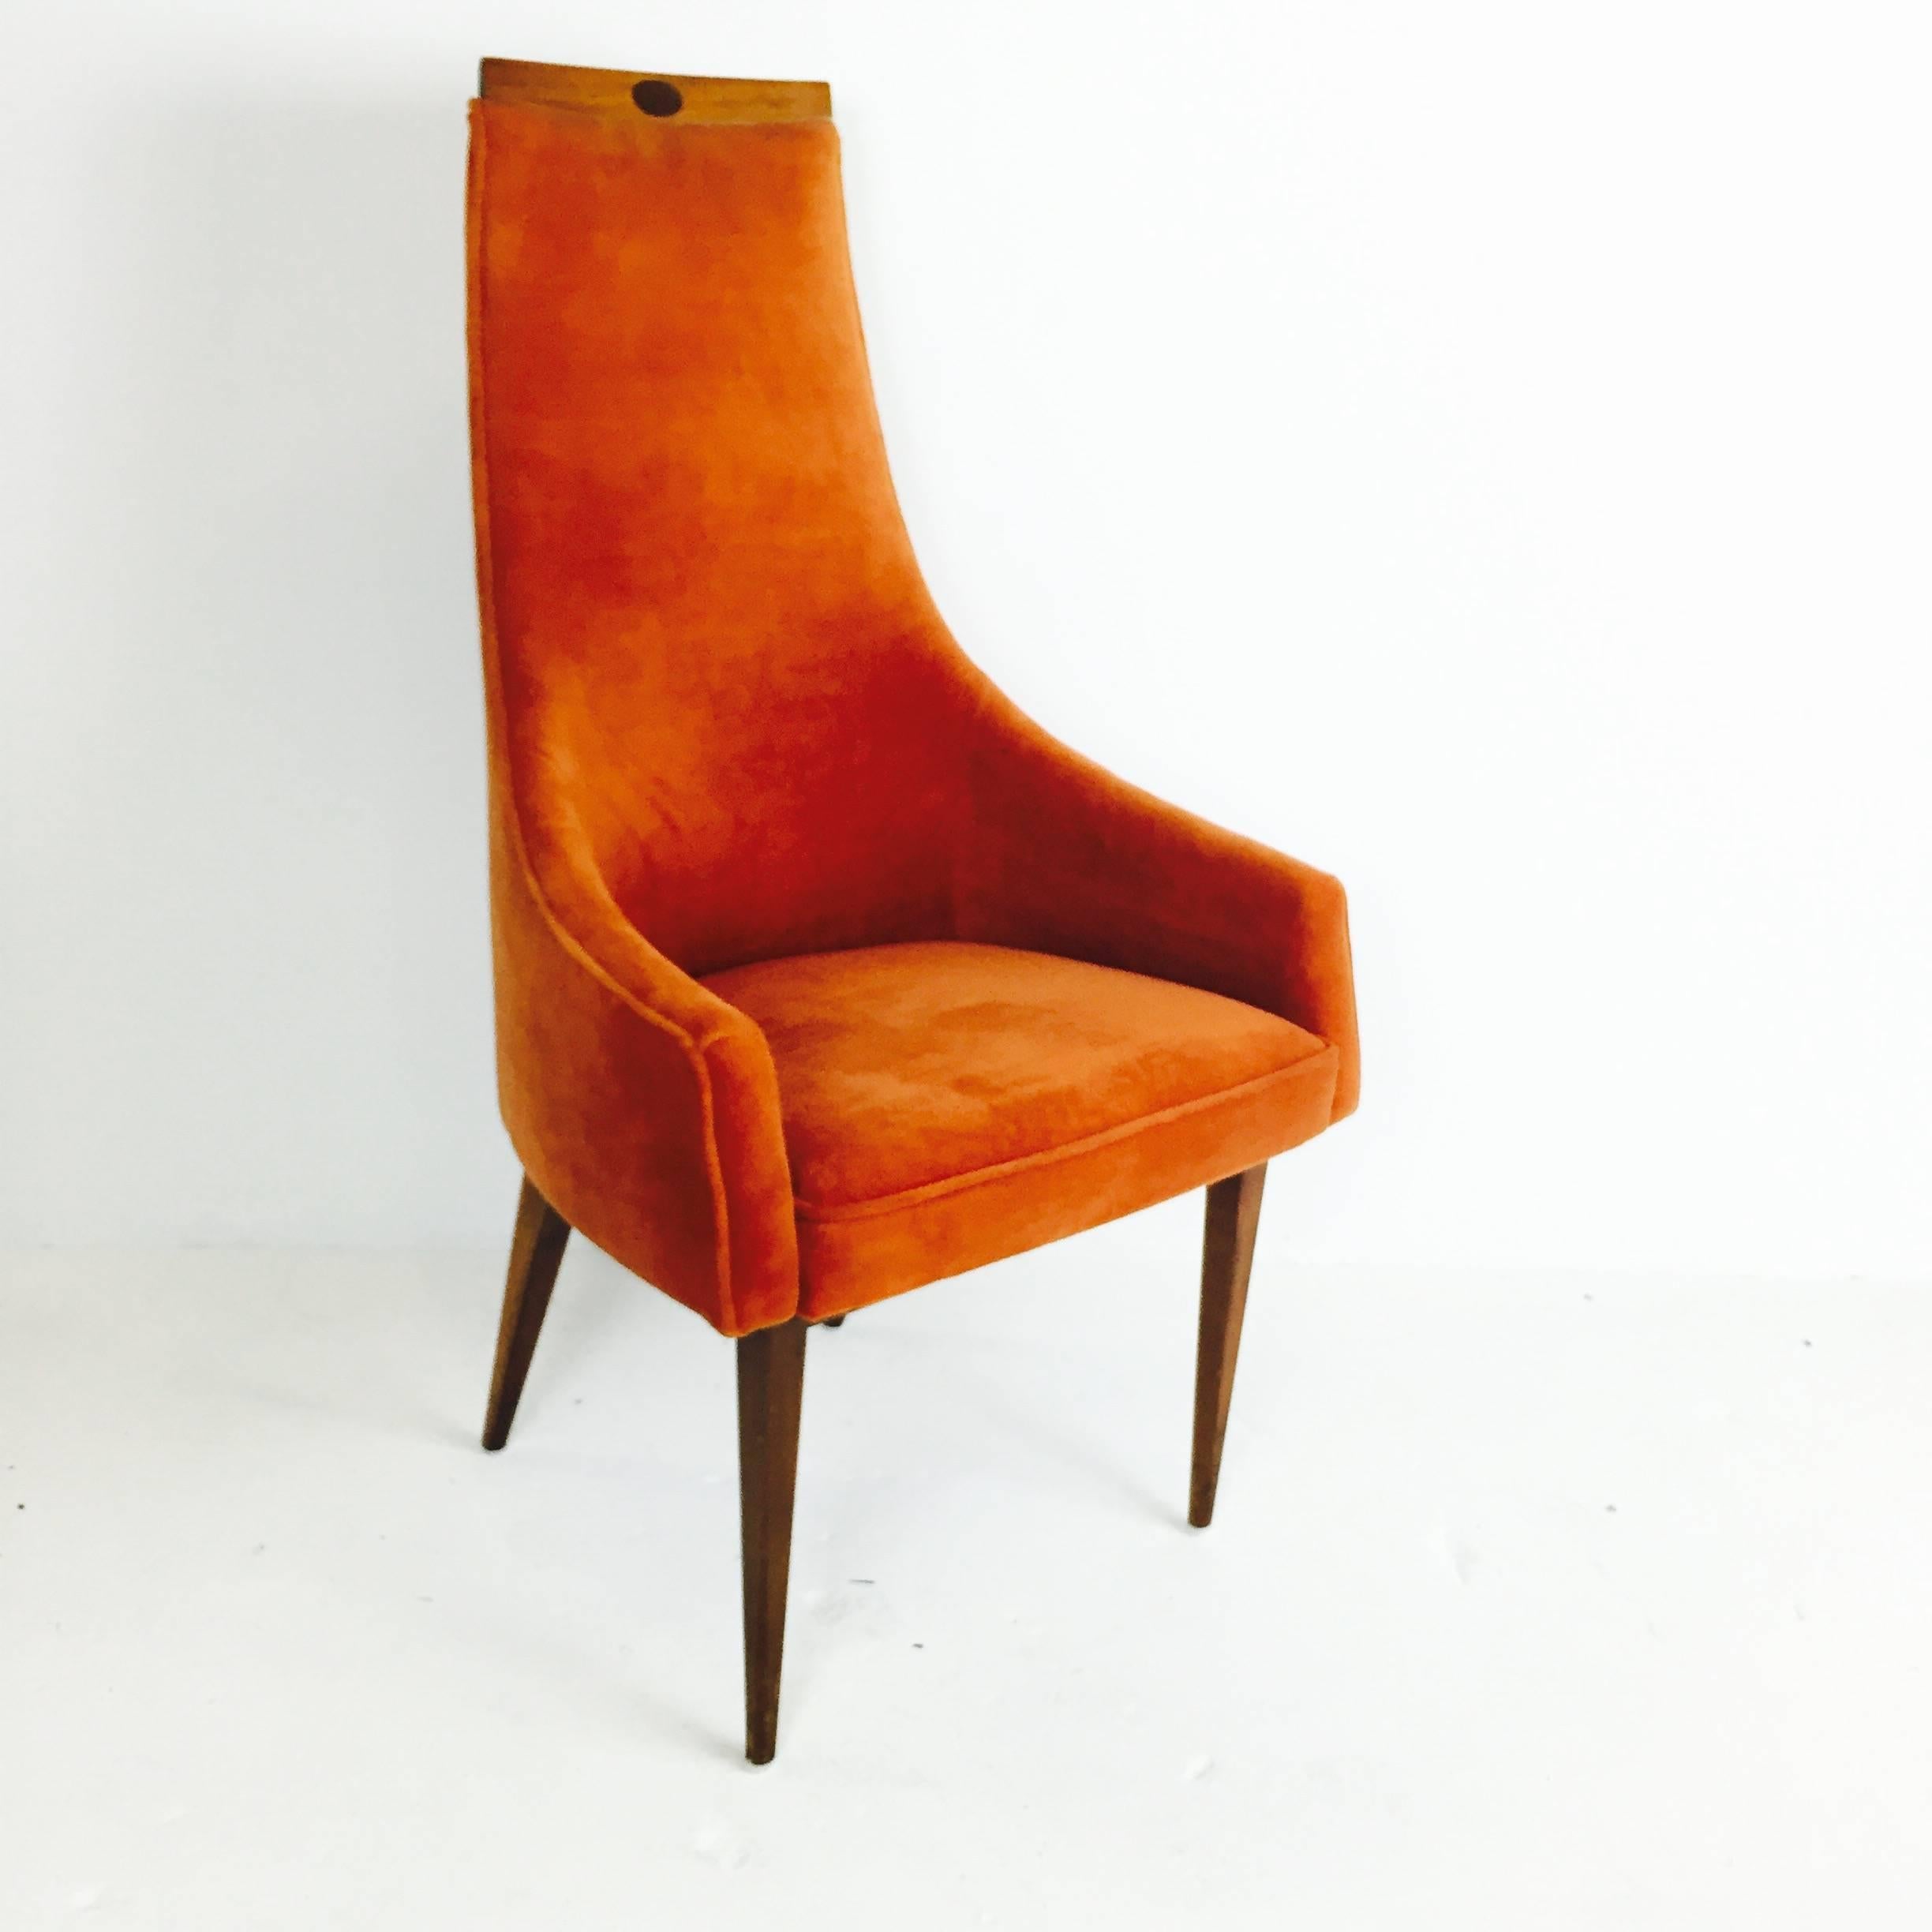 Pair of Adrian Pearsall tall back armchairs in original orange velvet upholstery. Needs refinishing.

Please see our other listing for six sides and two armchairs.

Dimensions: 24.5